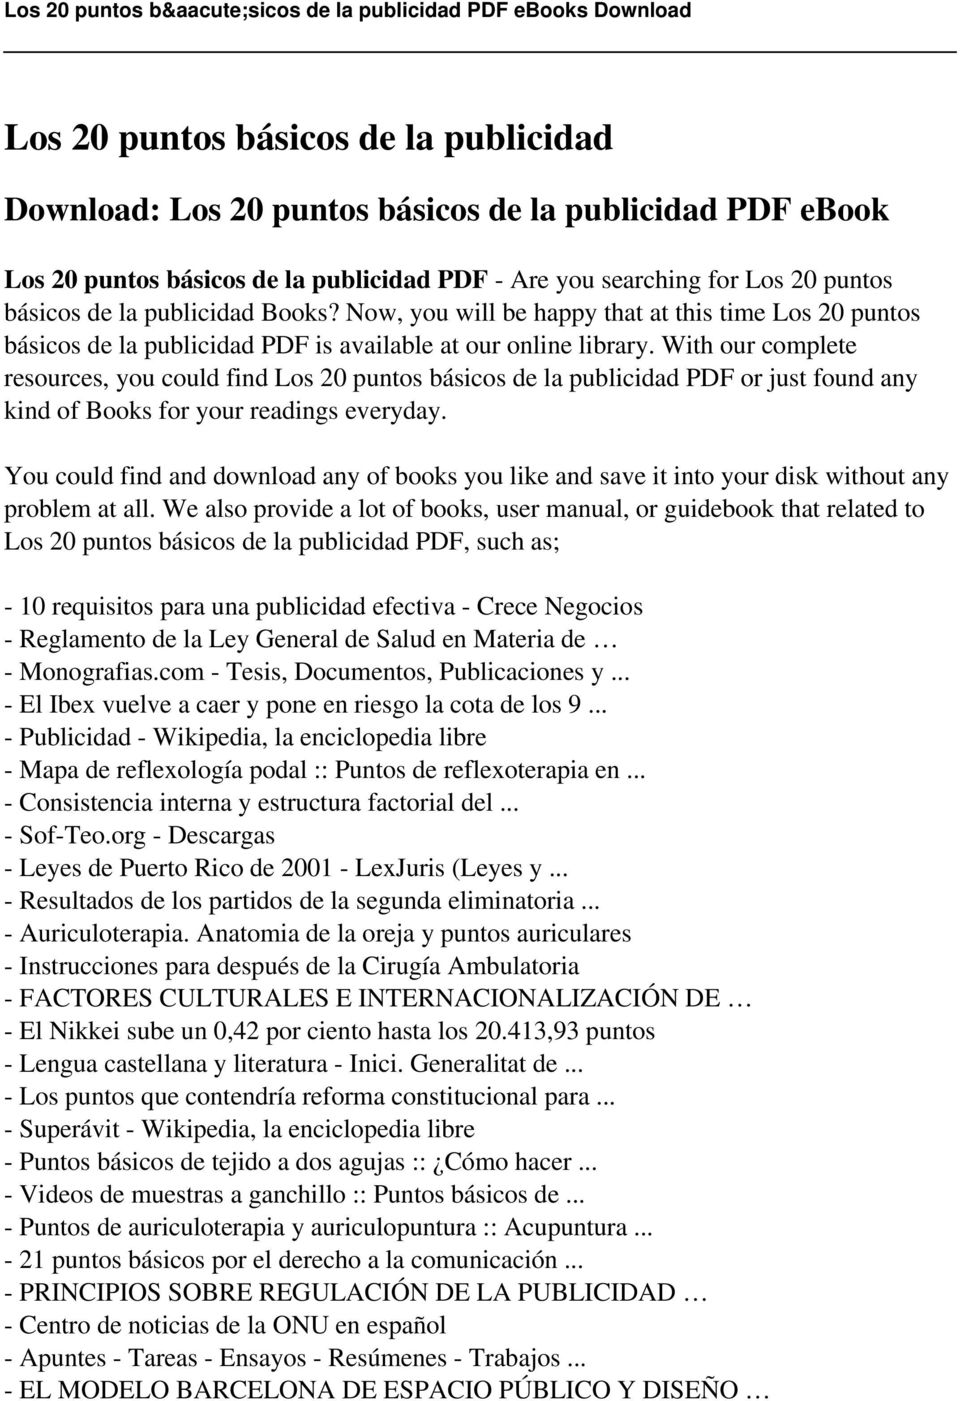 With our complete resources, you could find Los 20 puntos básicos de la publicidad PDF or just found any kind of Books for your readings everyday.